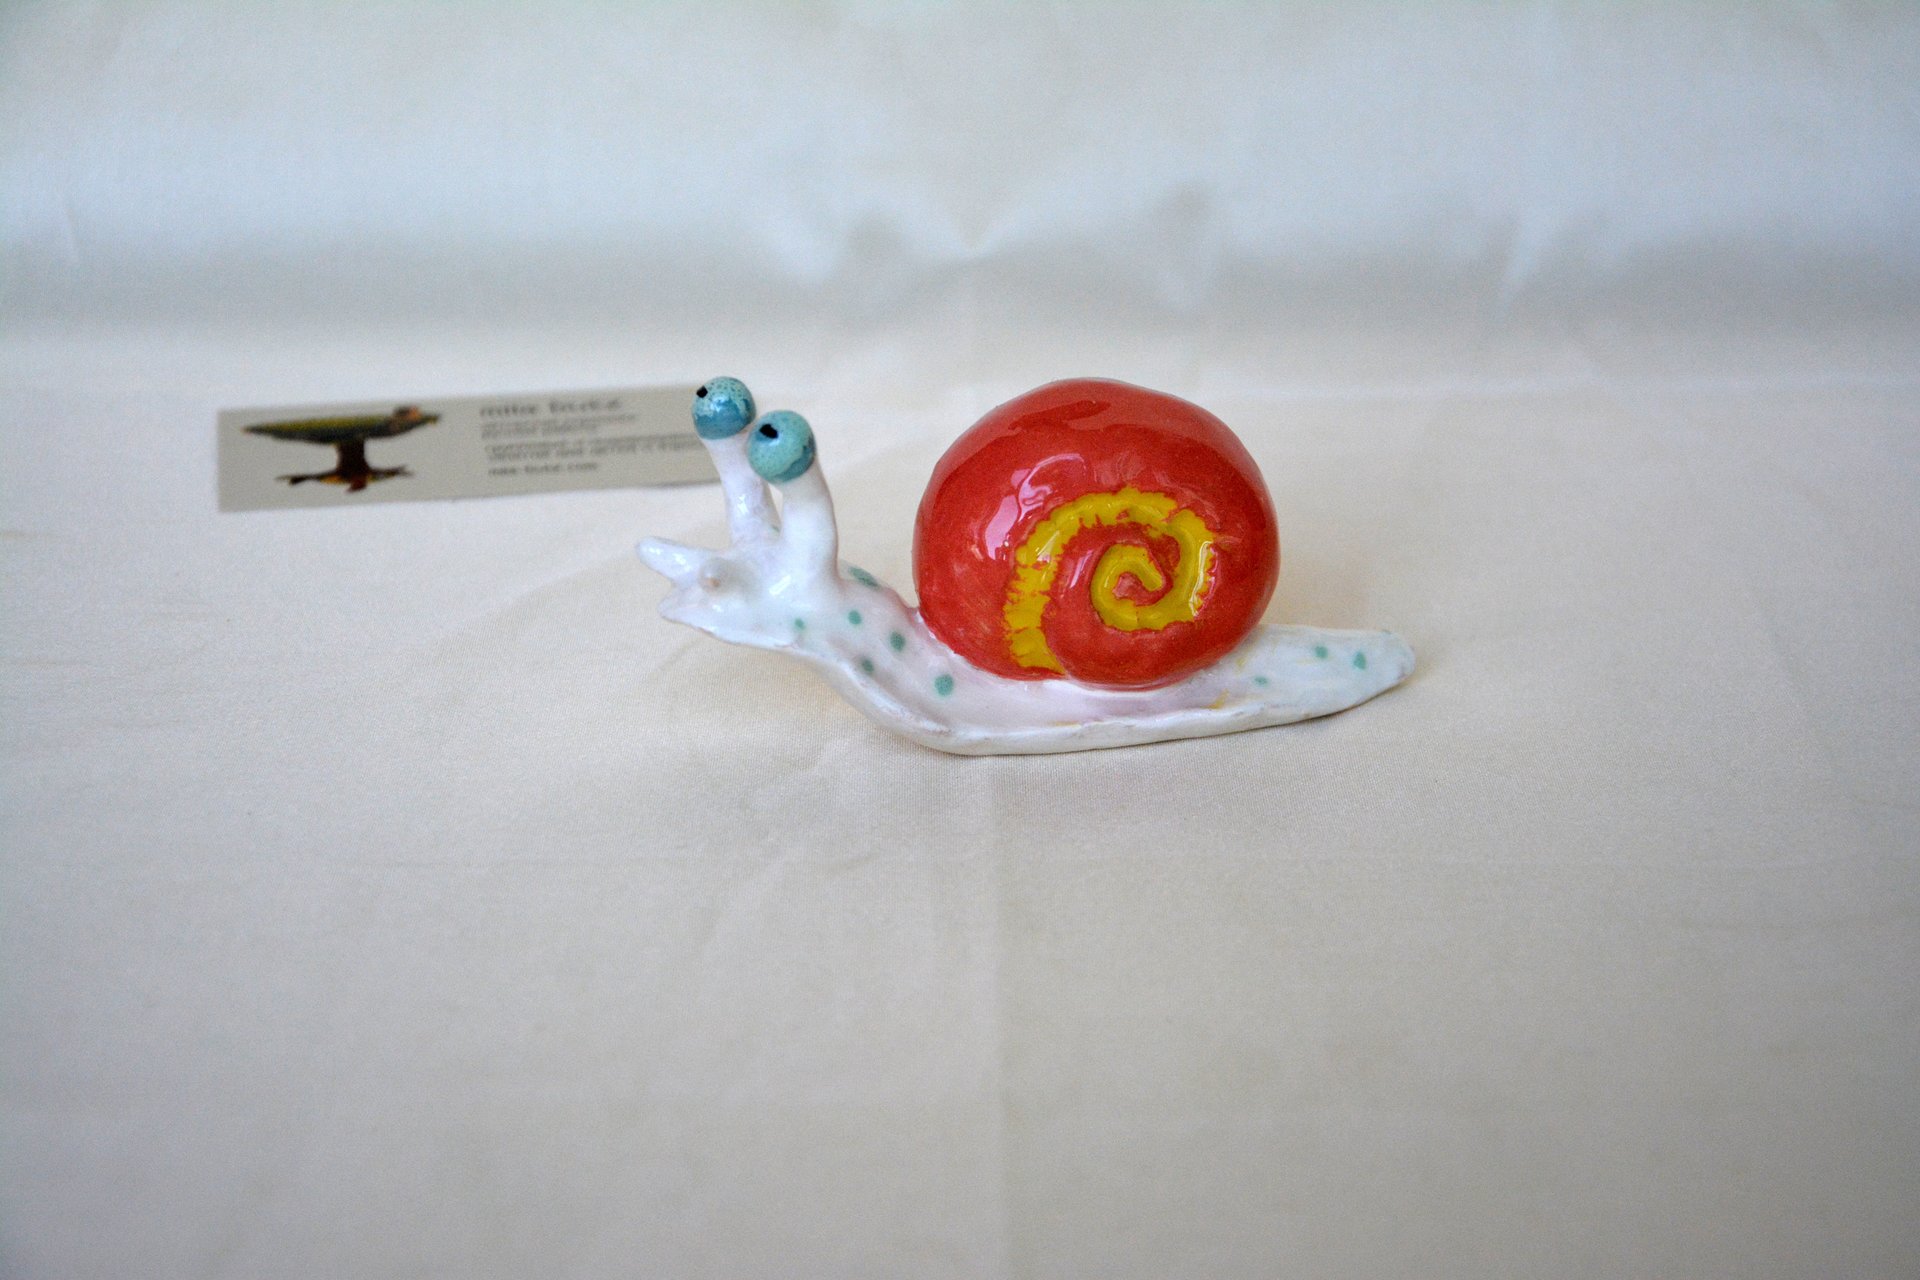 The figurine of a Cochlea is red-white, height - 4 cm, photo 2 of 6.